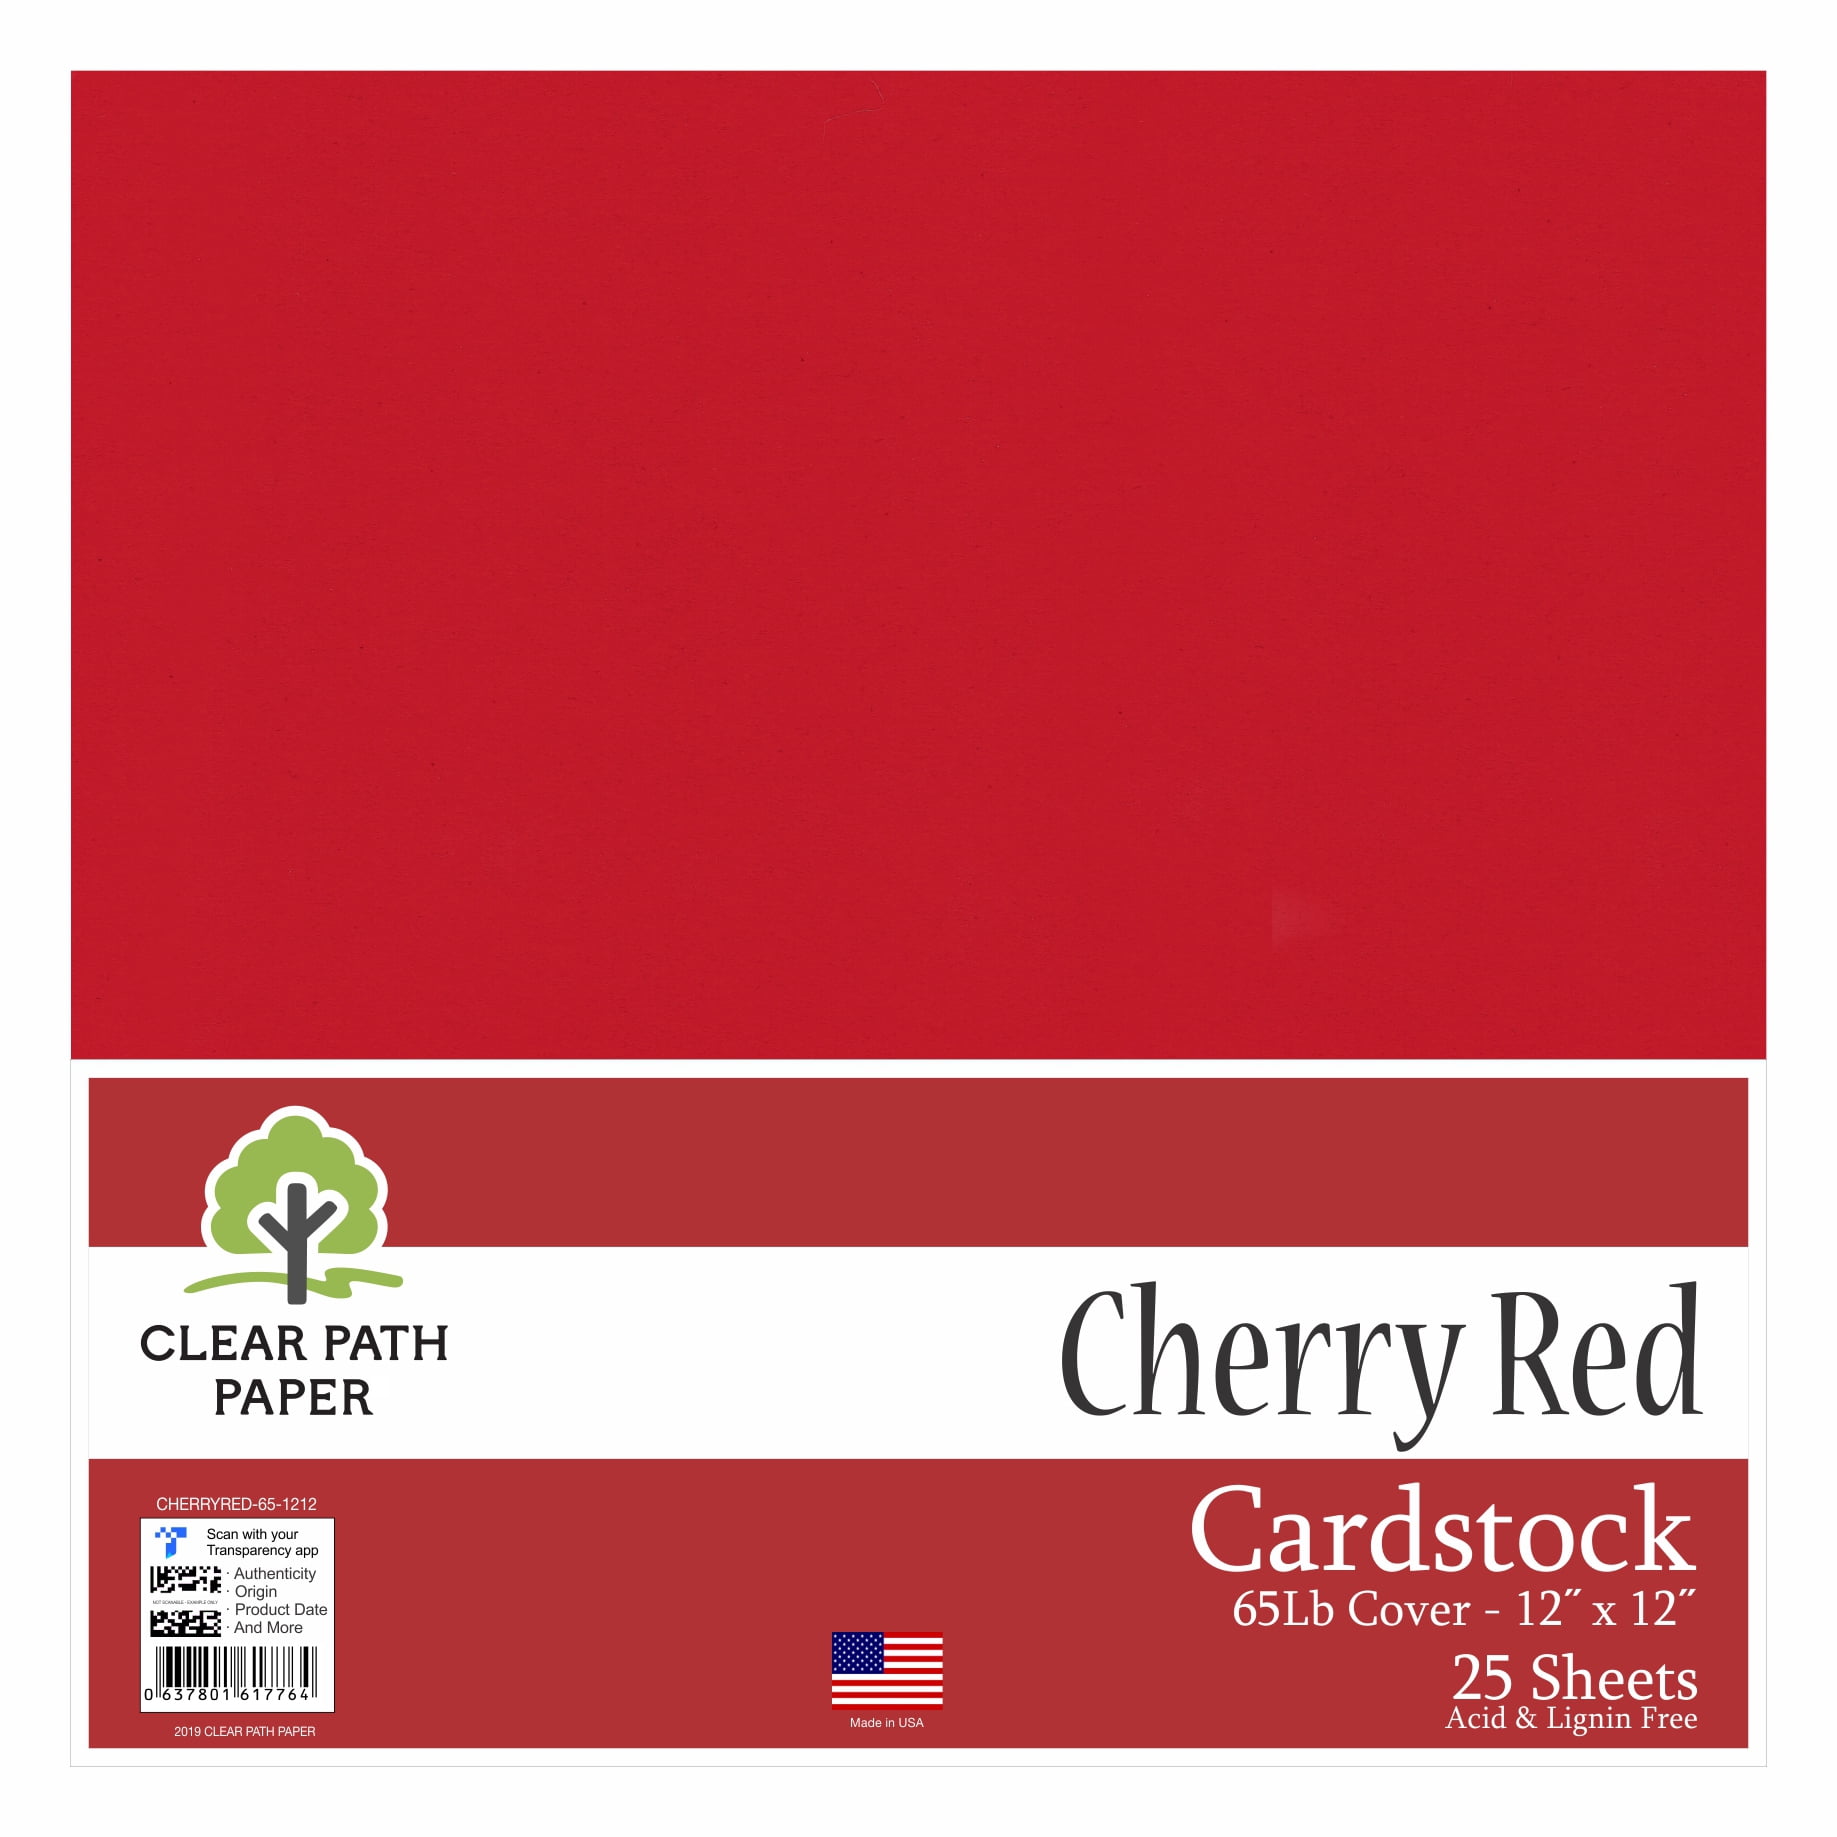 Cherry Red Cardstock - 12 x 12 inch - 100Lb Cover - 25 Sheets - Clear Path  Paper